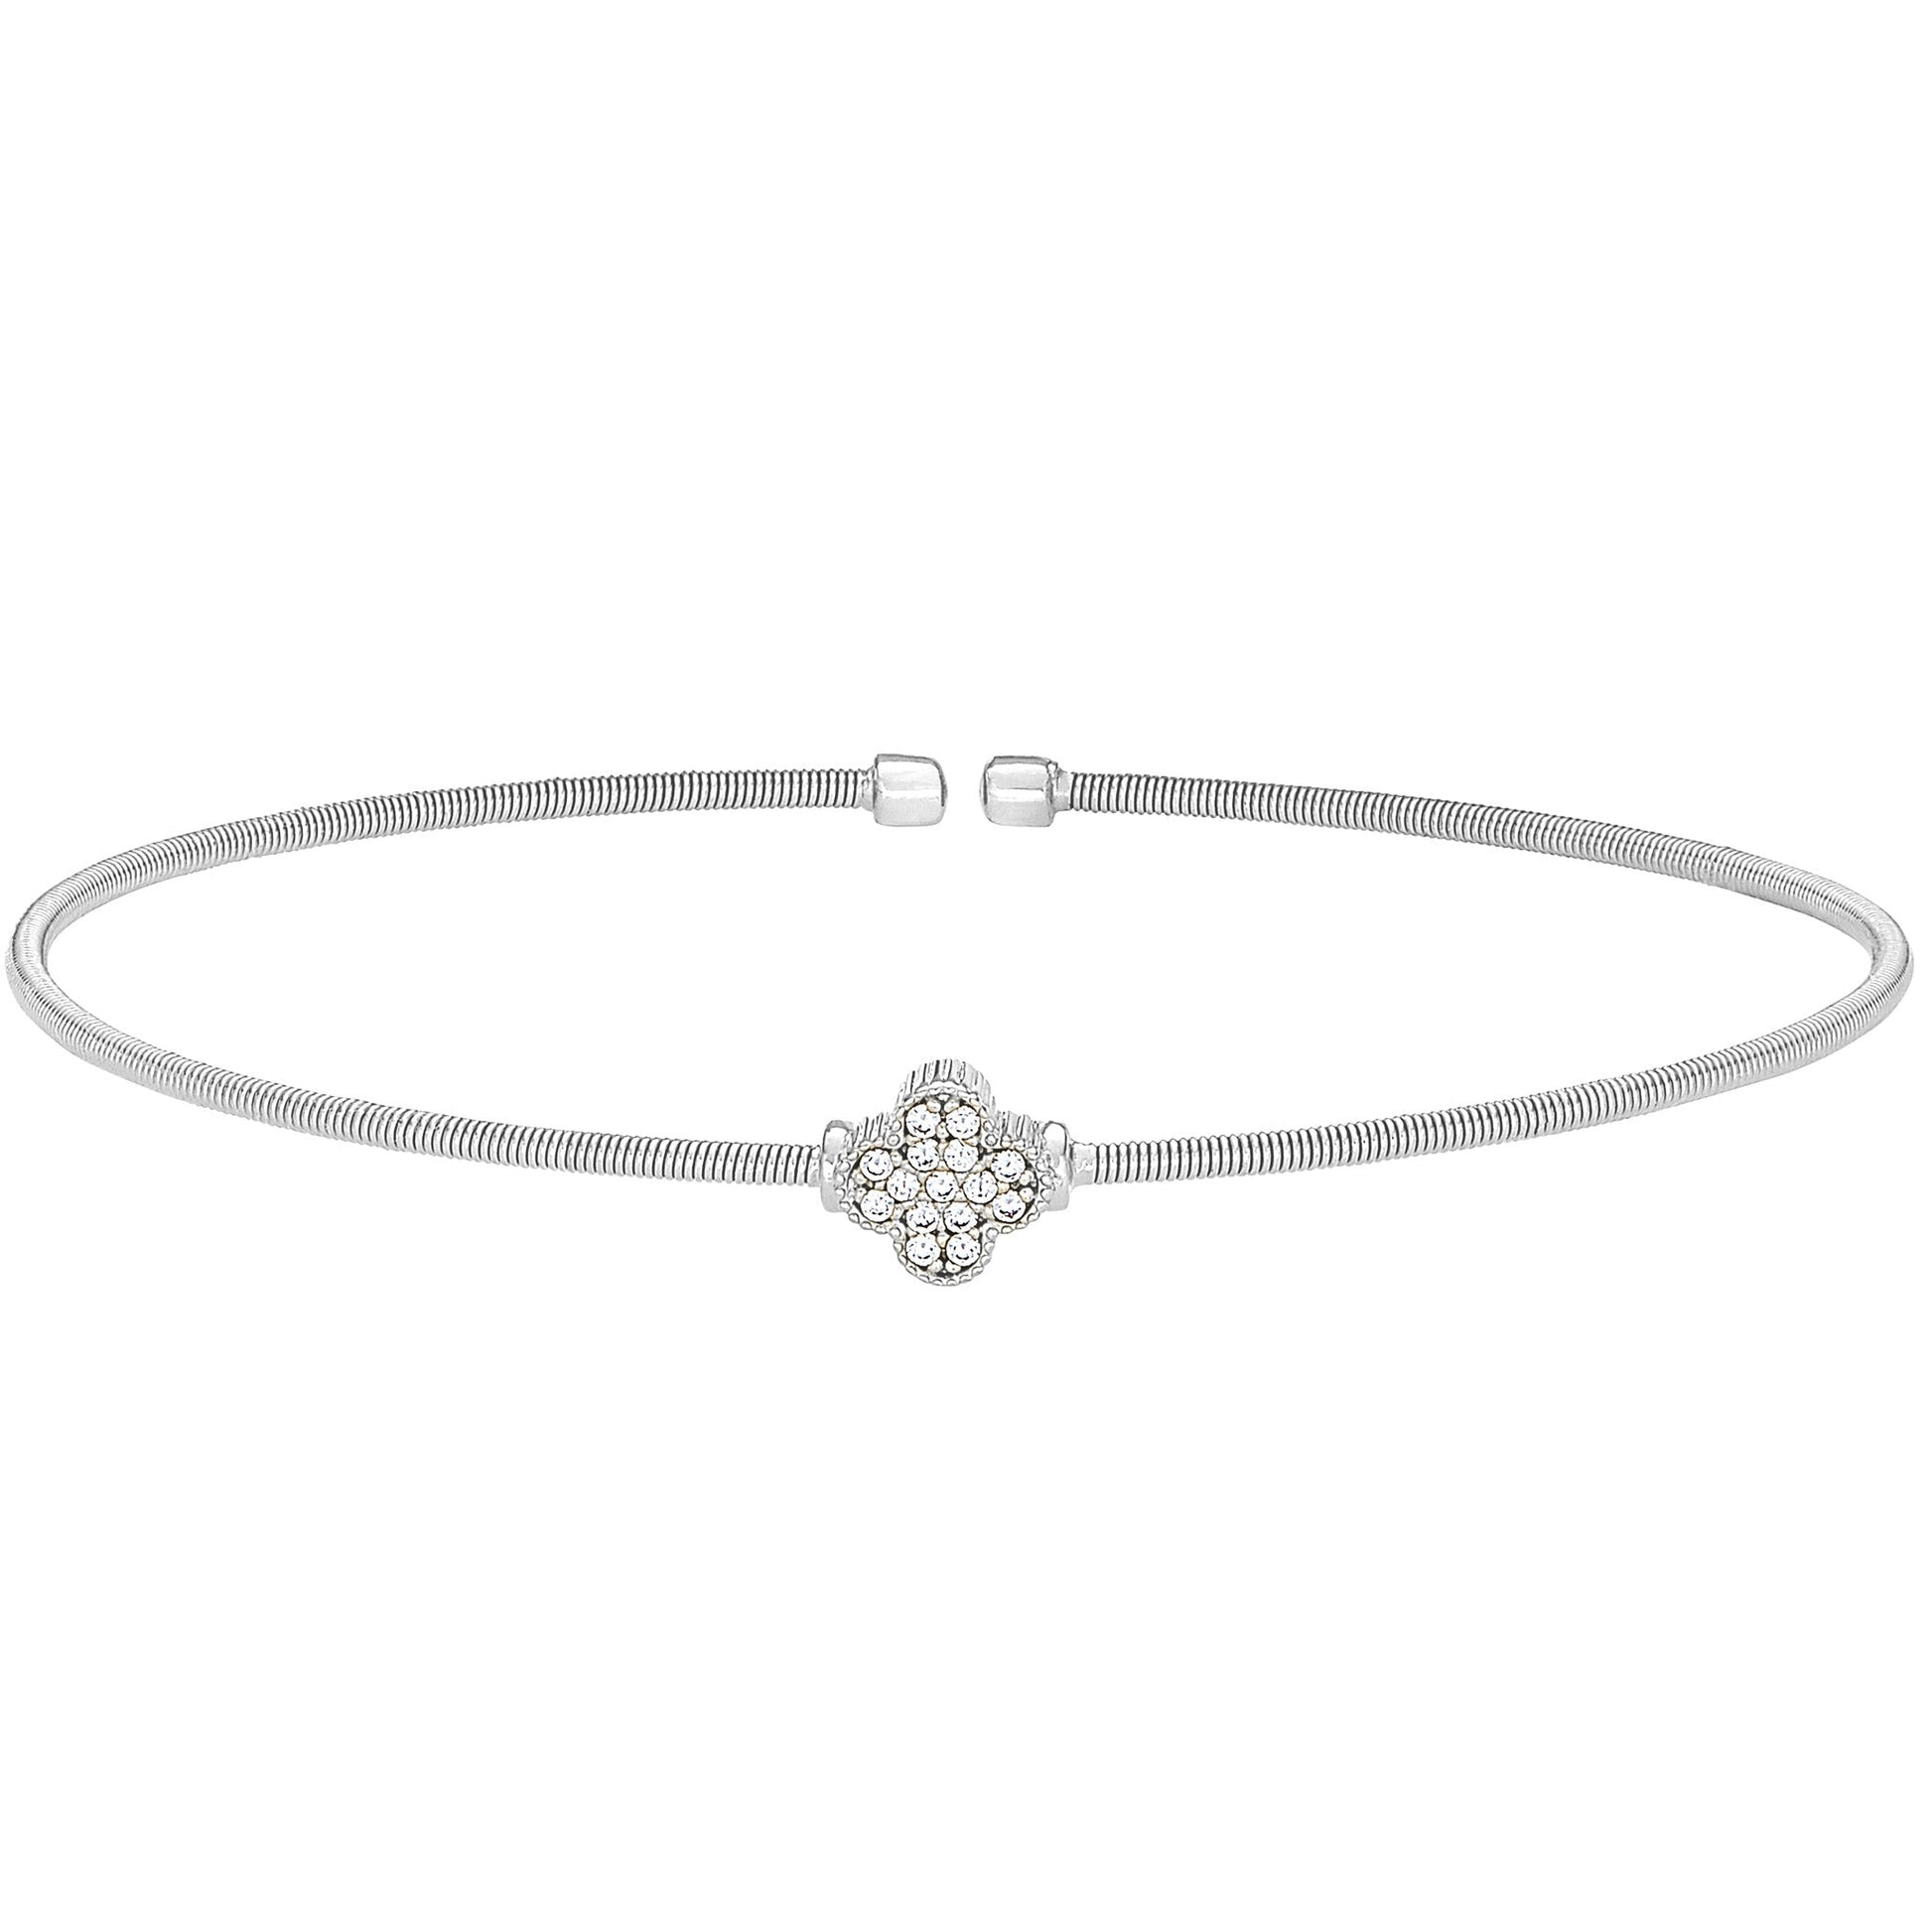 A clover design flexible cable bracelet with simulated diamonds displayed on a neutral white background.